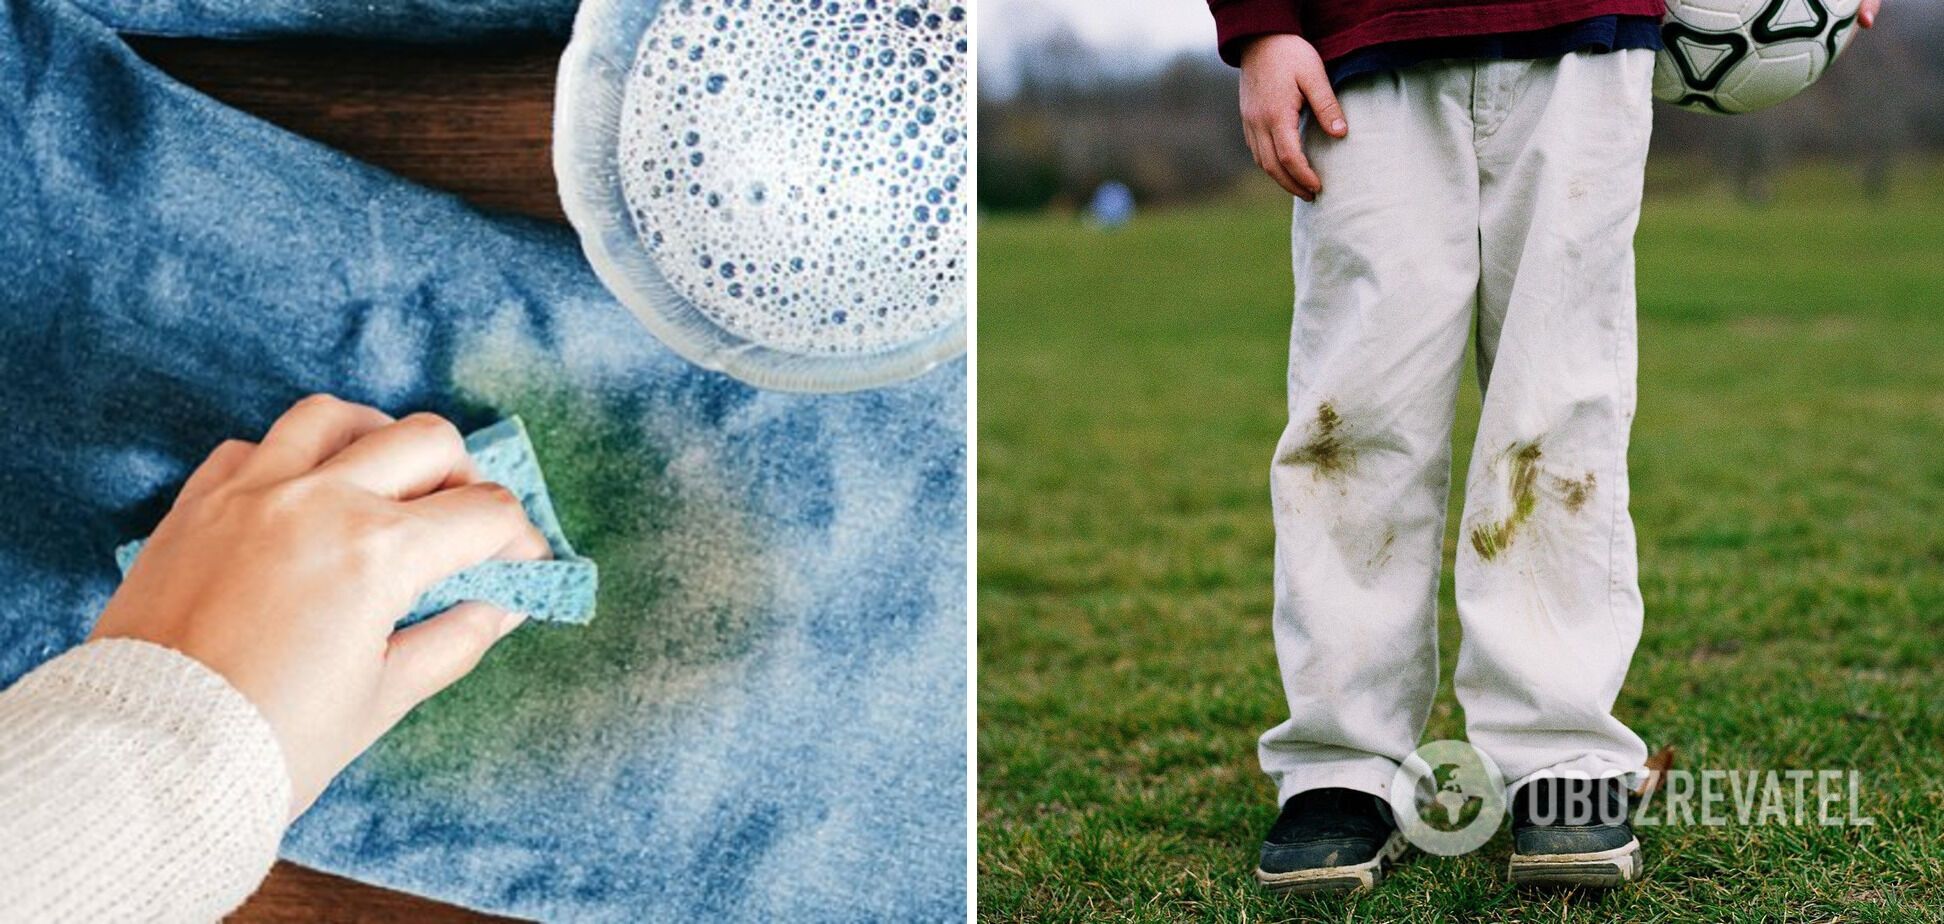 How to get rid of grass stains on clothes: summer life hacks